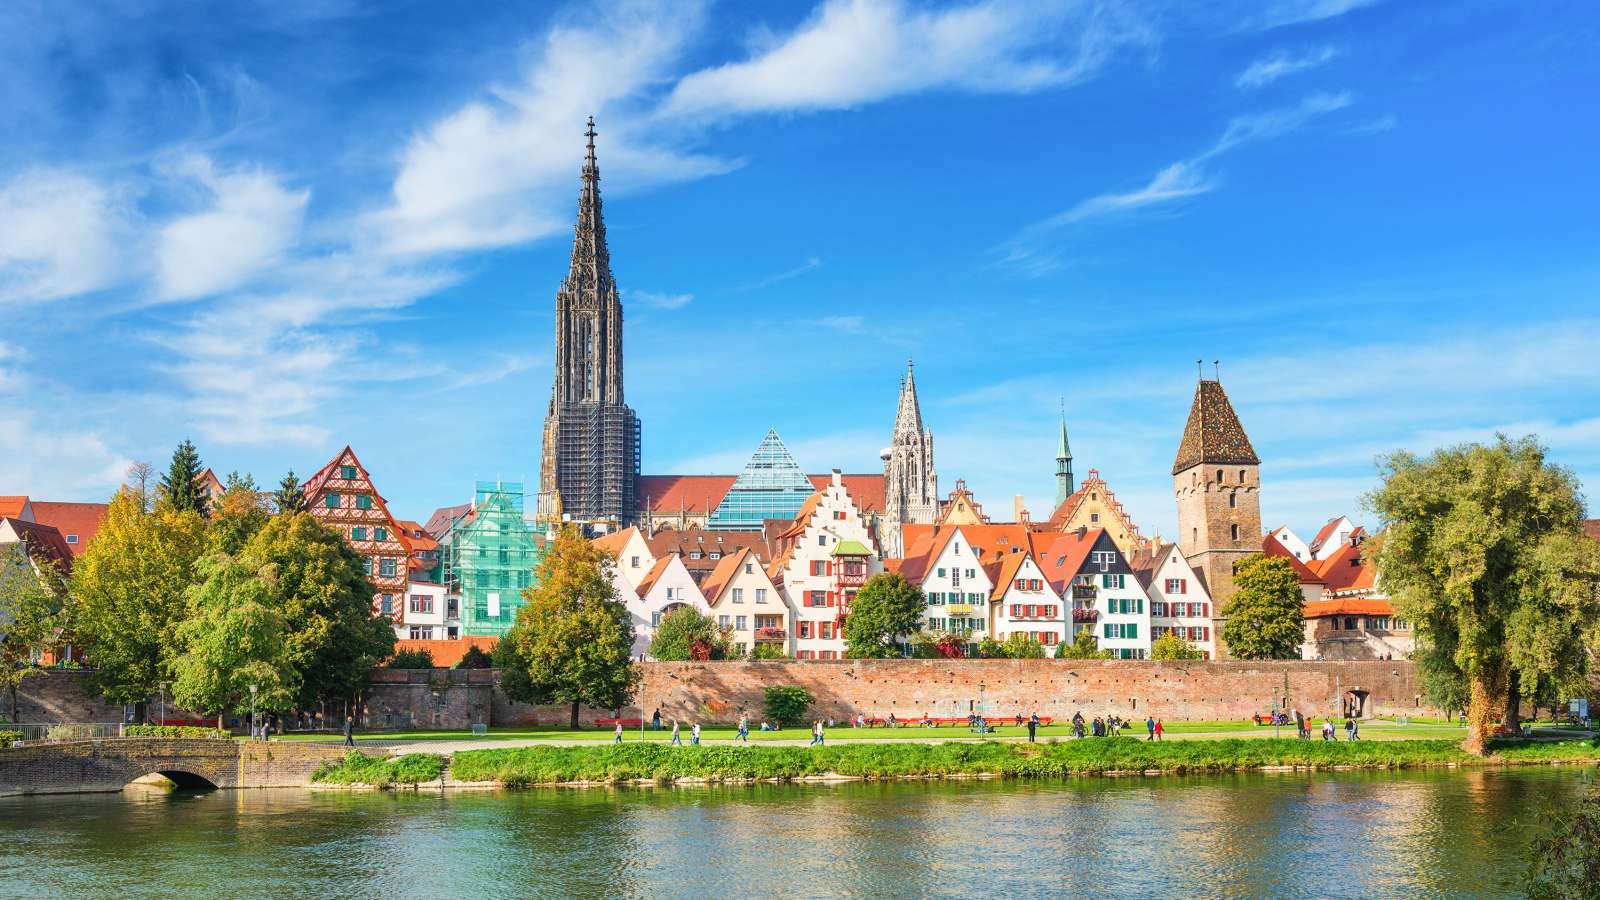 Most Charming Medieval Towns in Europe